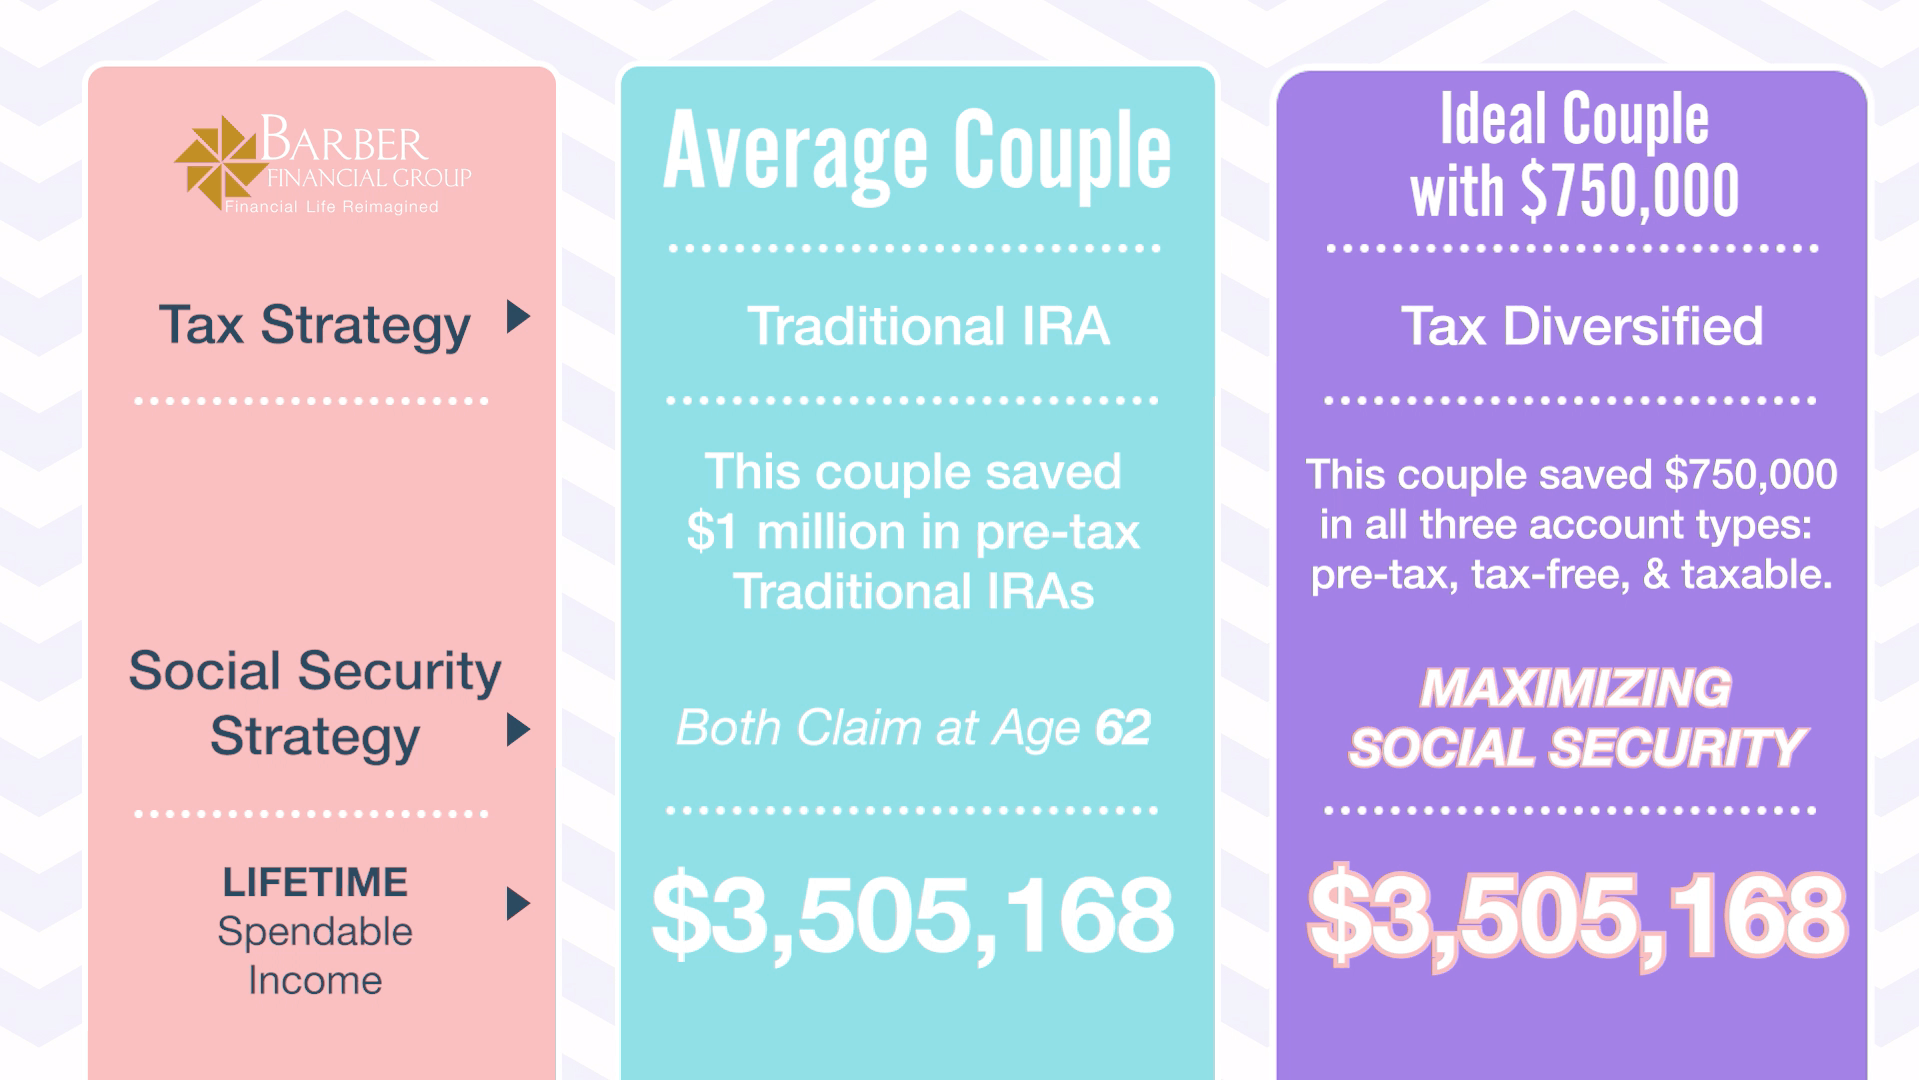 How $750k Can Go as Far as $1 Million in Retirement - Average Couple versus Ideal with 750k